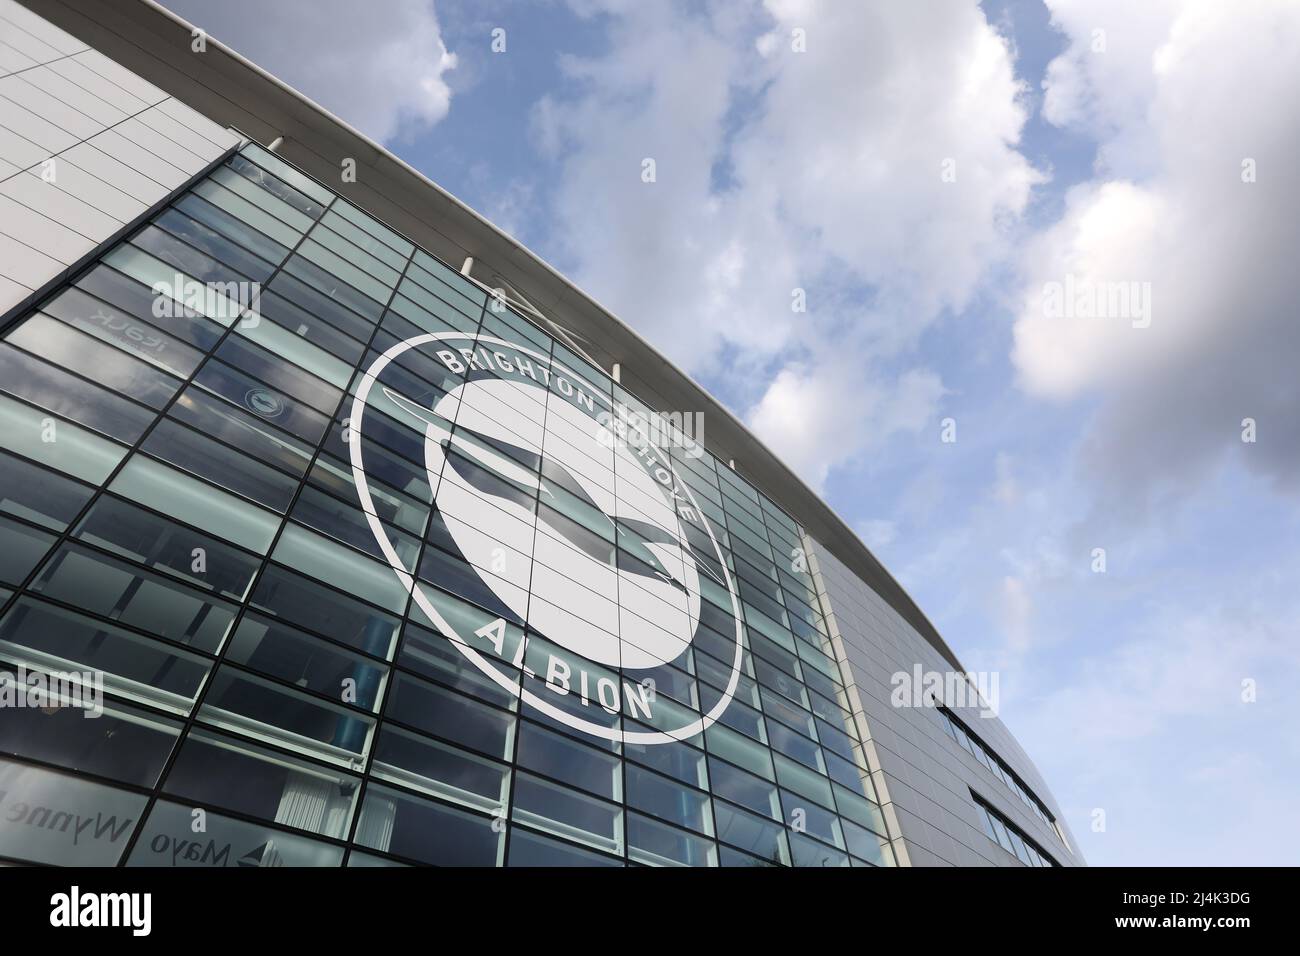 General views of Brighton and Hove Albion Football Club, Brighton, Sussex, UK. Stock Photo